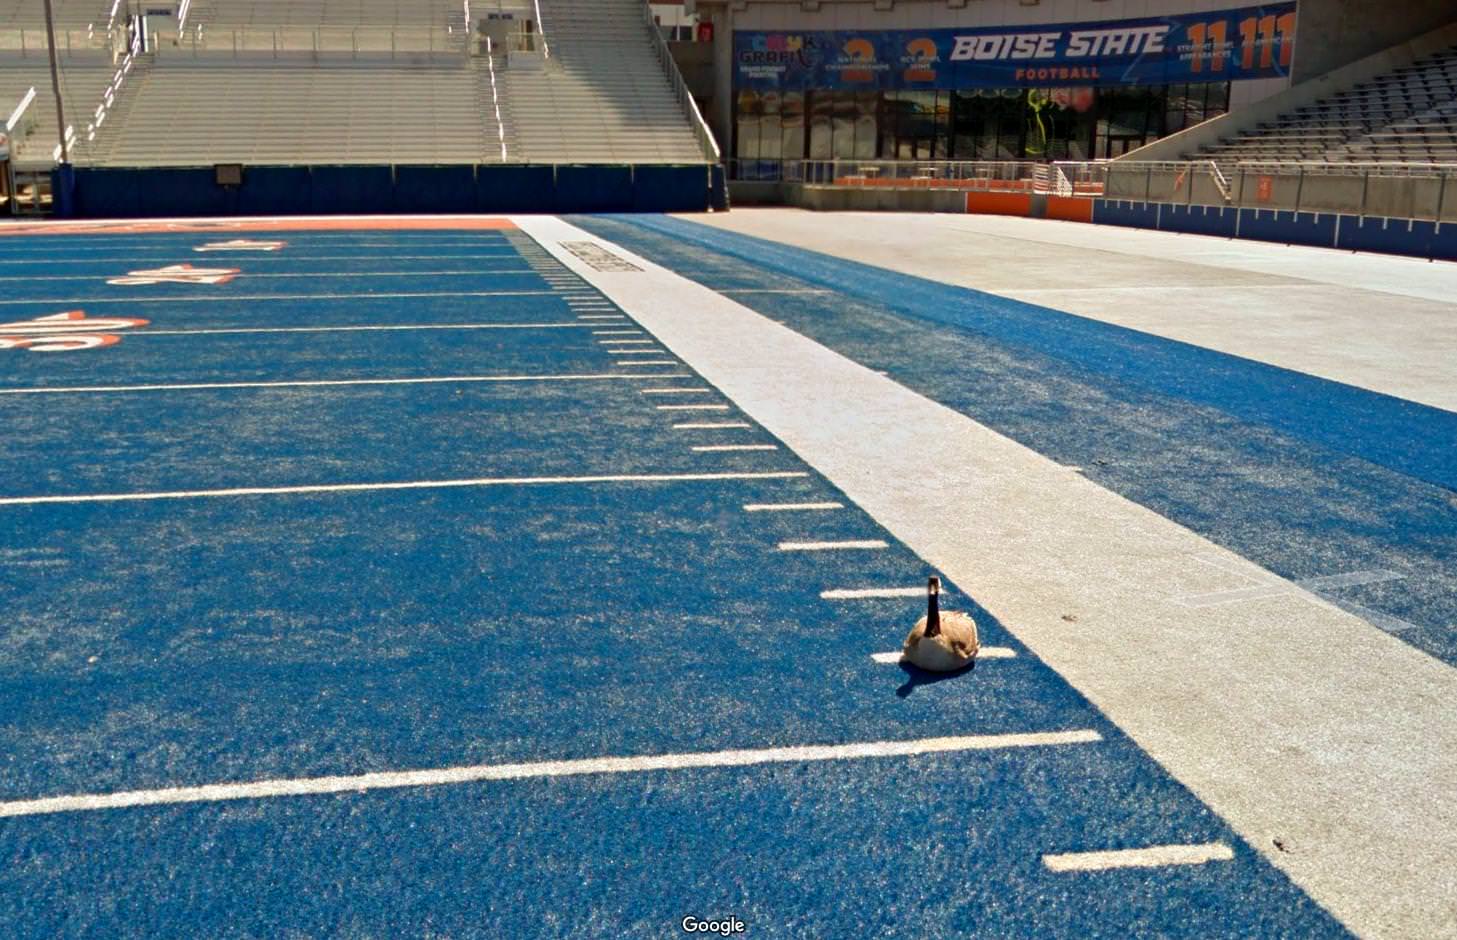 We have a Blue Football field. It confuses out of towners.